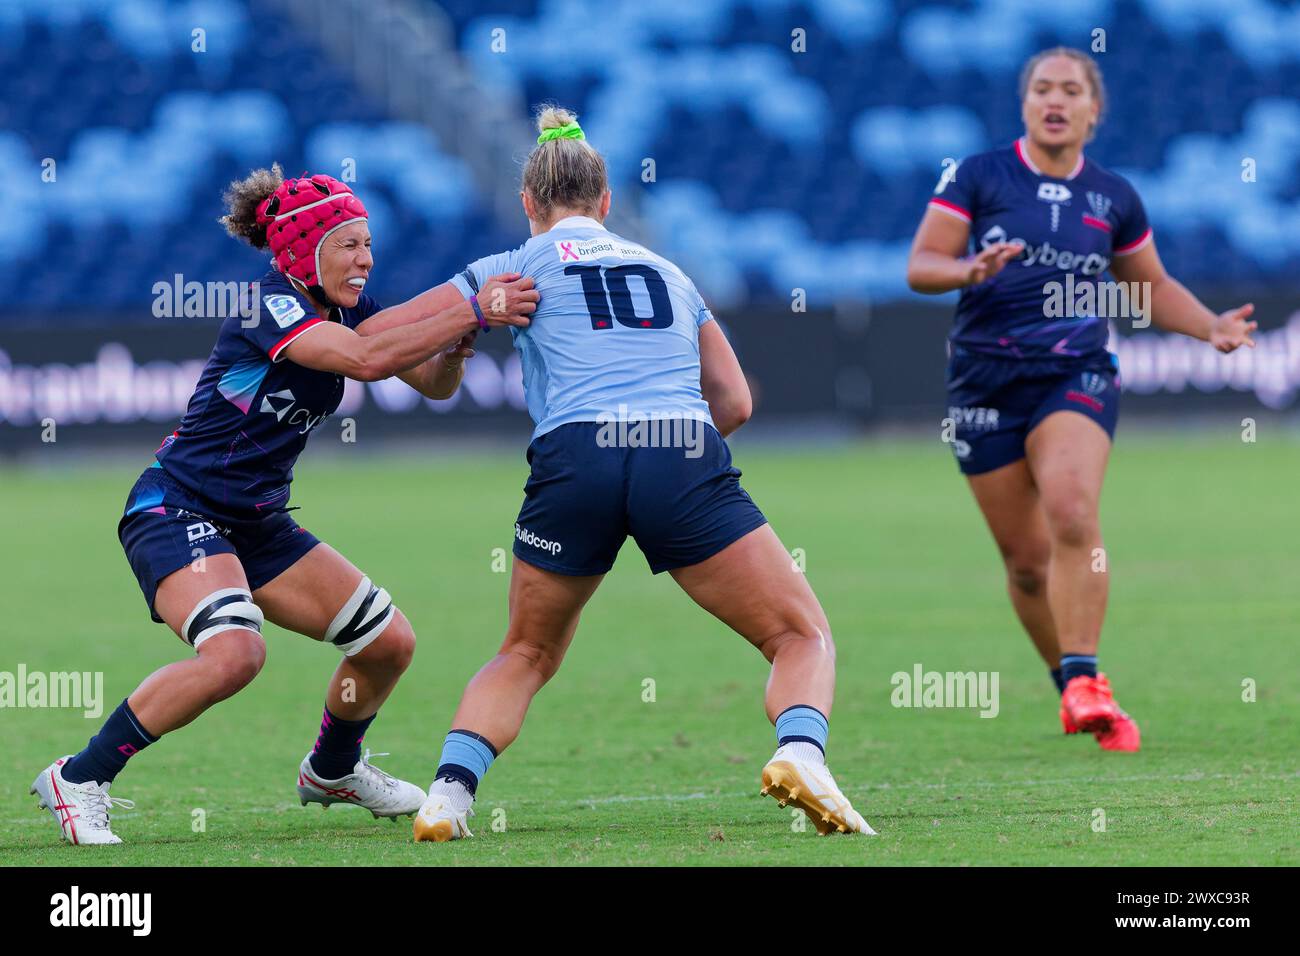 Sydney, Australia. 29th Mar, 2024. Arabella McKenzie of the Waratahs is tackled by Melanie Kawa of the Rebels during the Super Rugby Women's 2024 Rd3 match between the Waratahs and the Rebels at Allianz Stadium on March 29, 2024 in Sydney, Australia Credit: IOIO IMAGES/Alamy Live News Stock Photo